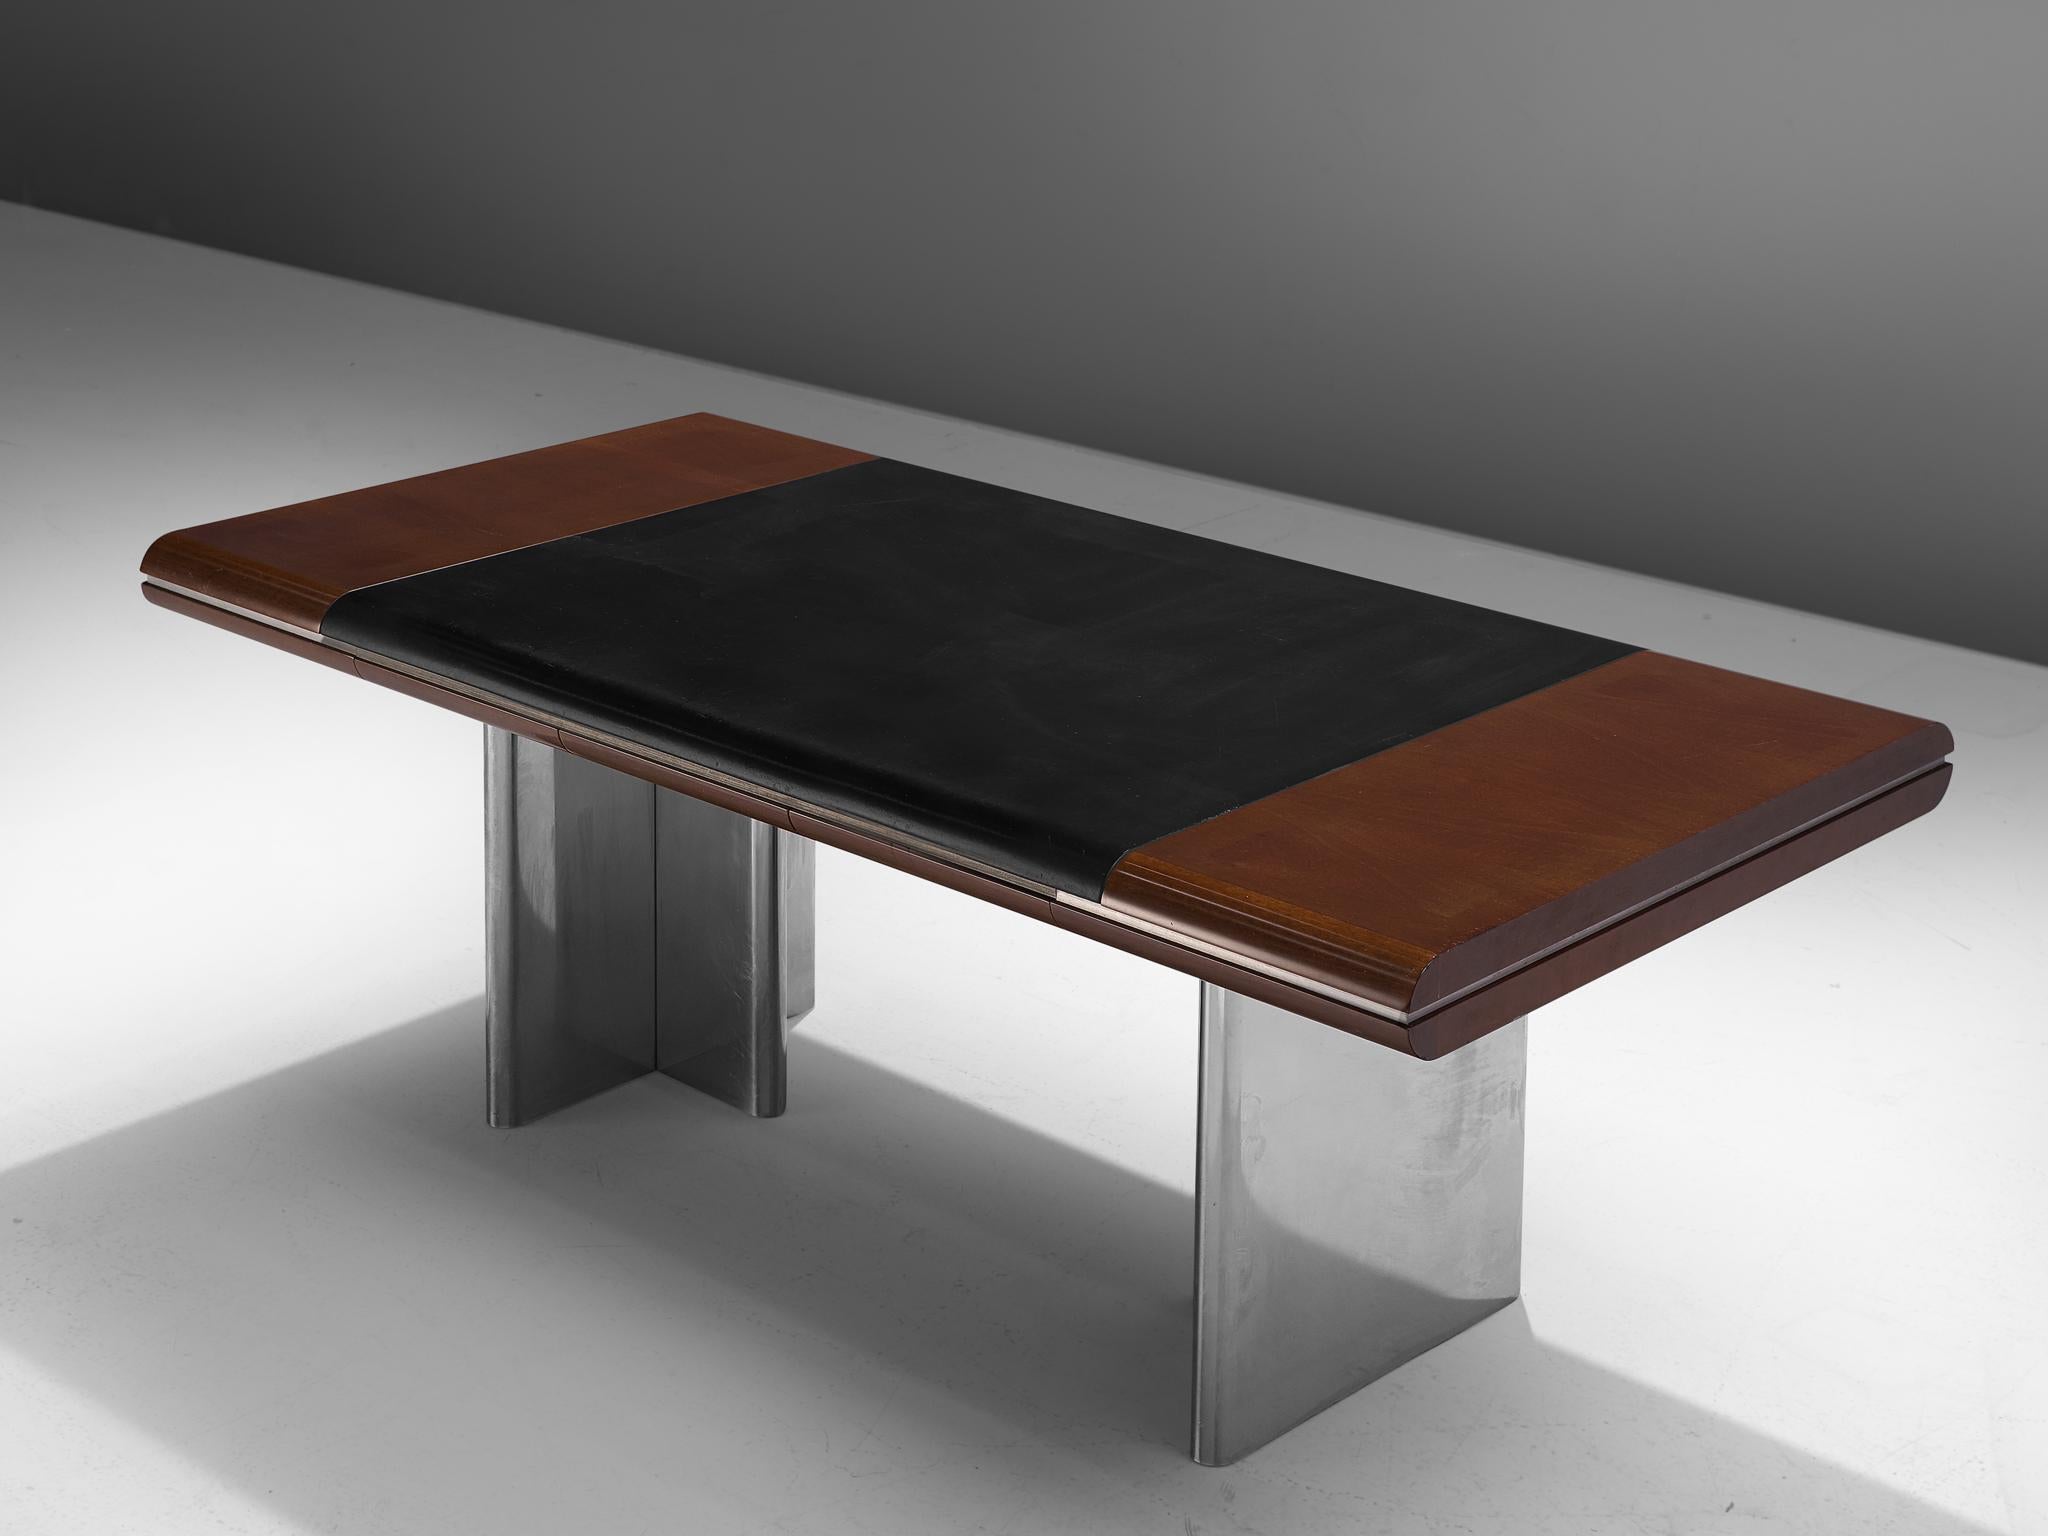 Hans Von Klier for Skipper, office table, mahogany, leather and metal, Italy, 1970s.

Modern desk designed by Hans Von Klier for Skipper, Italia. The table consists of a rectangular shaped wooden top with a steel strip and inlayed with black